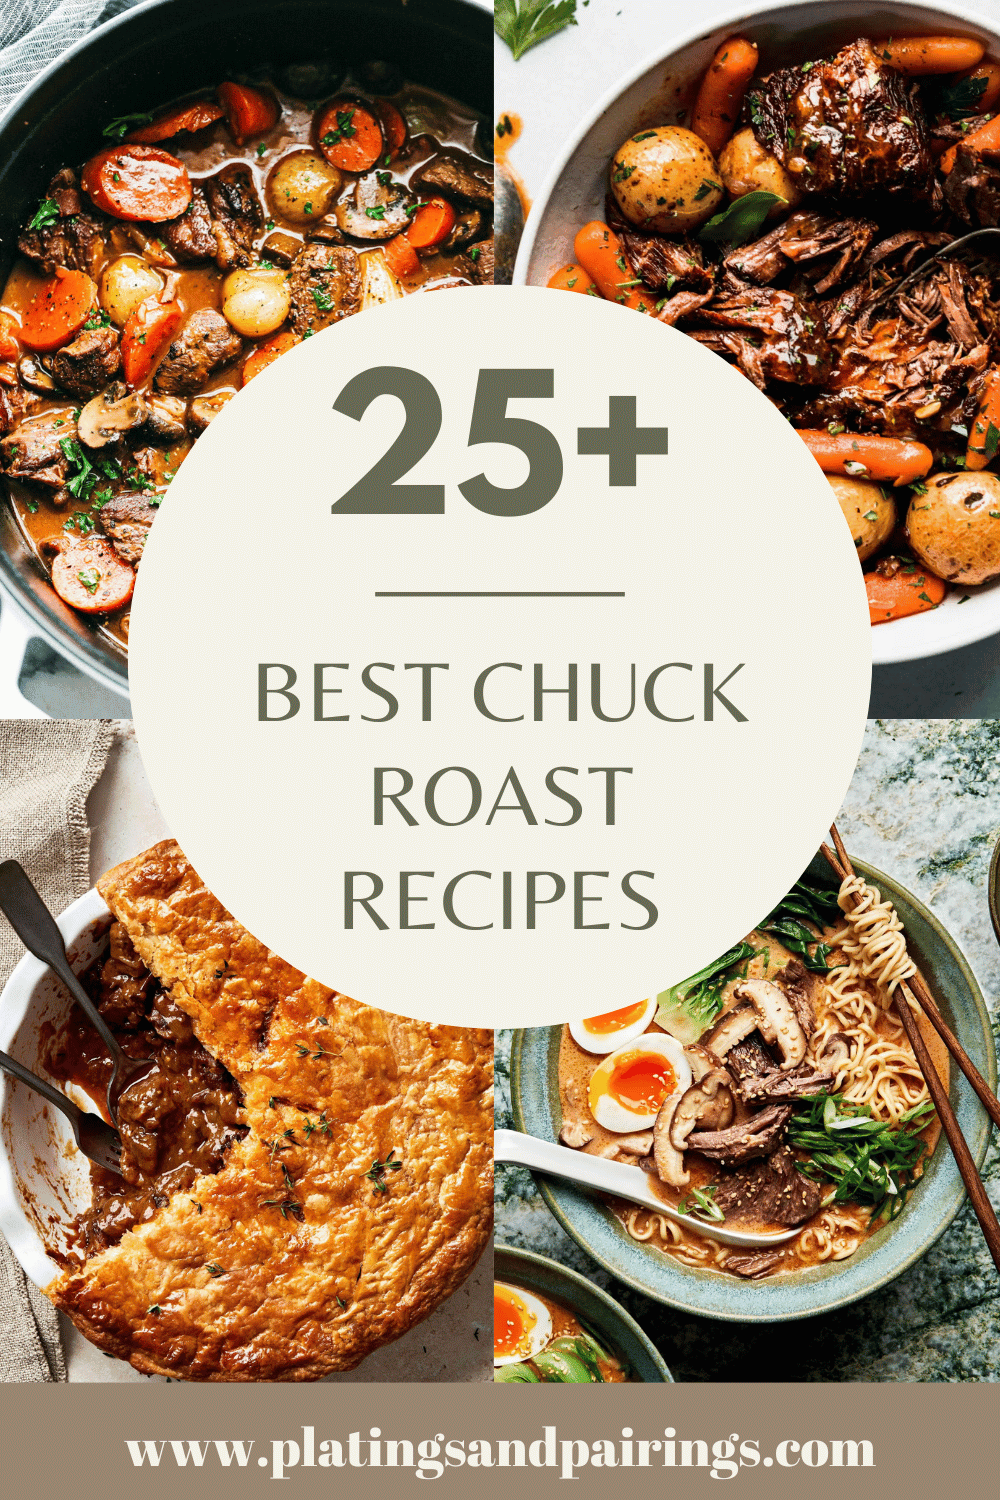 Collage of chuck roast recipes with text overlay.